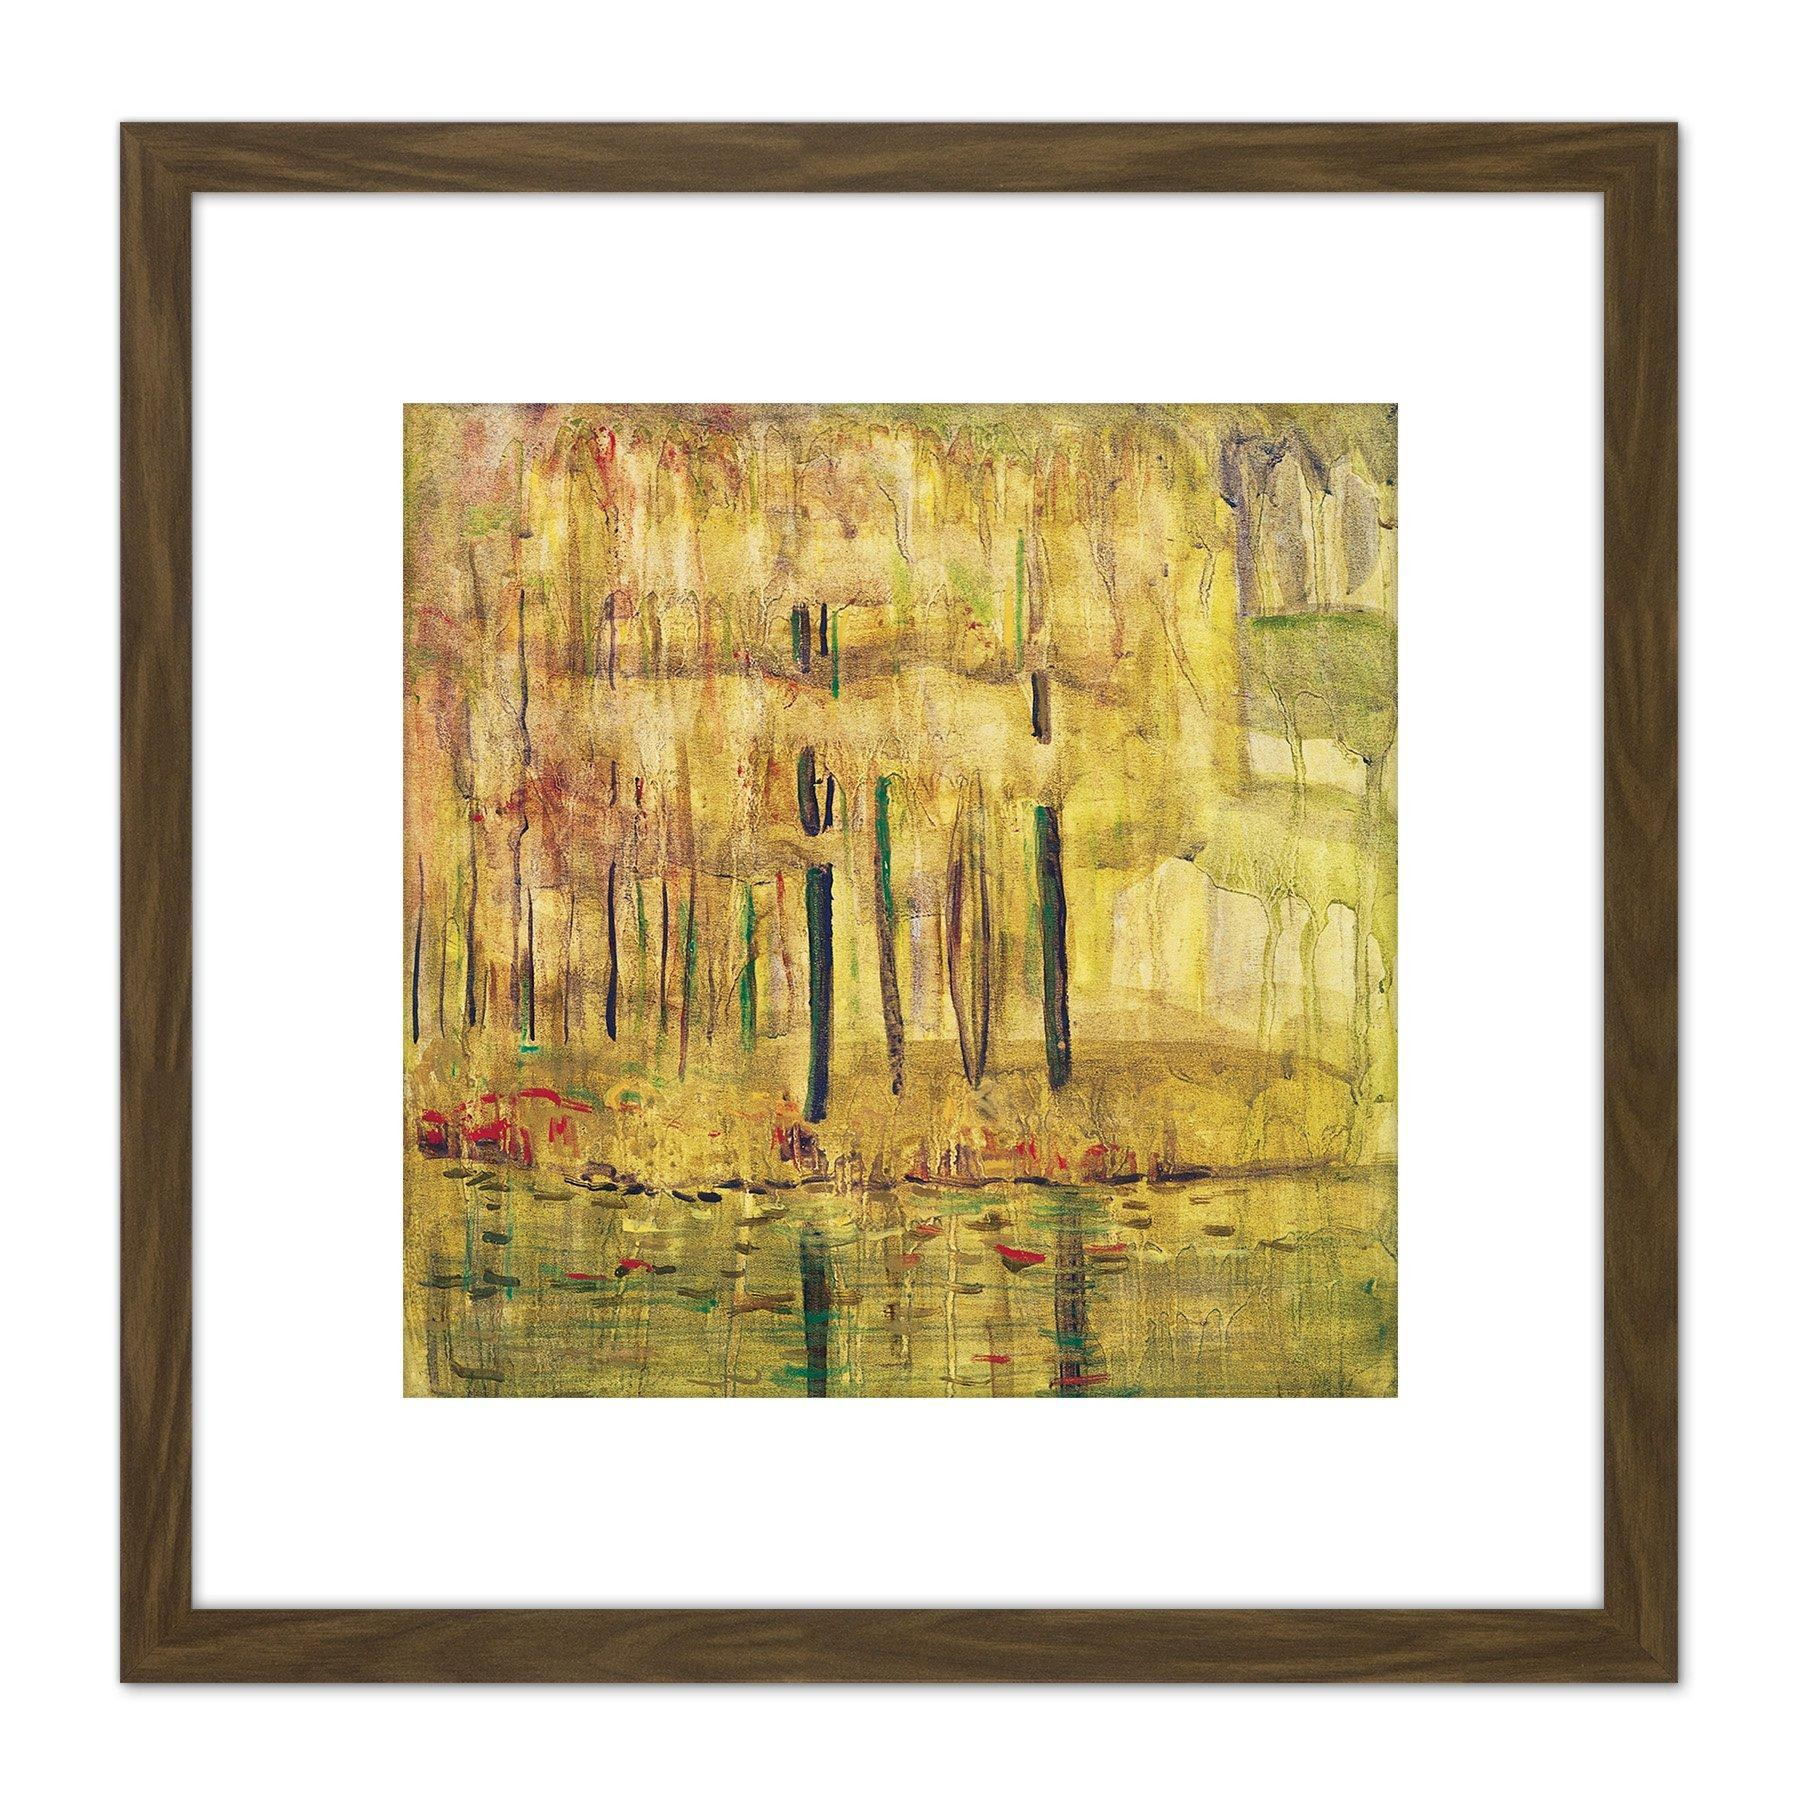 Ciurlionis Etude Study Symbolist Painting 8X8 Inch Square Wooden Framed Wall Art Print Picture with Mount - image 1